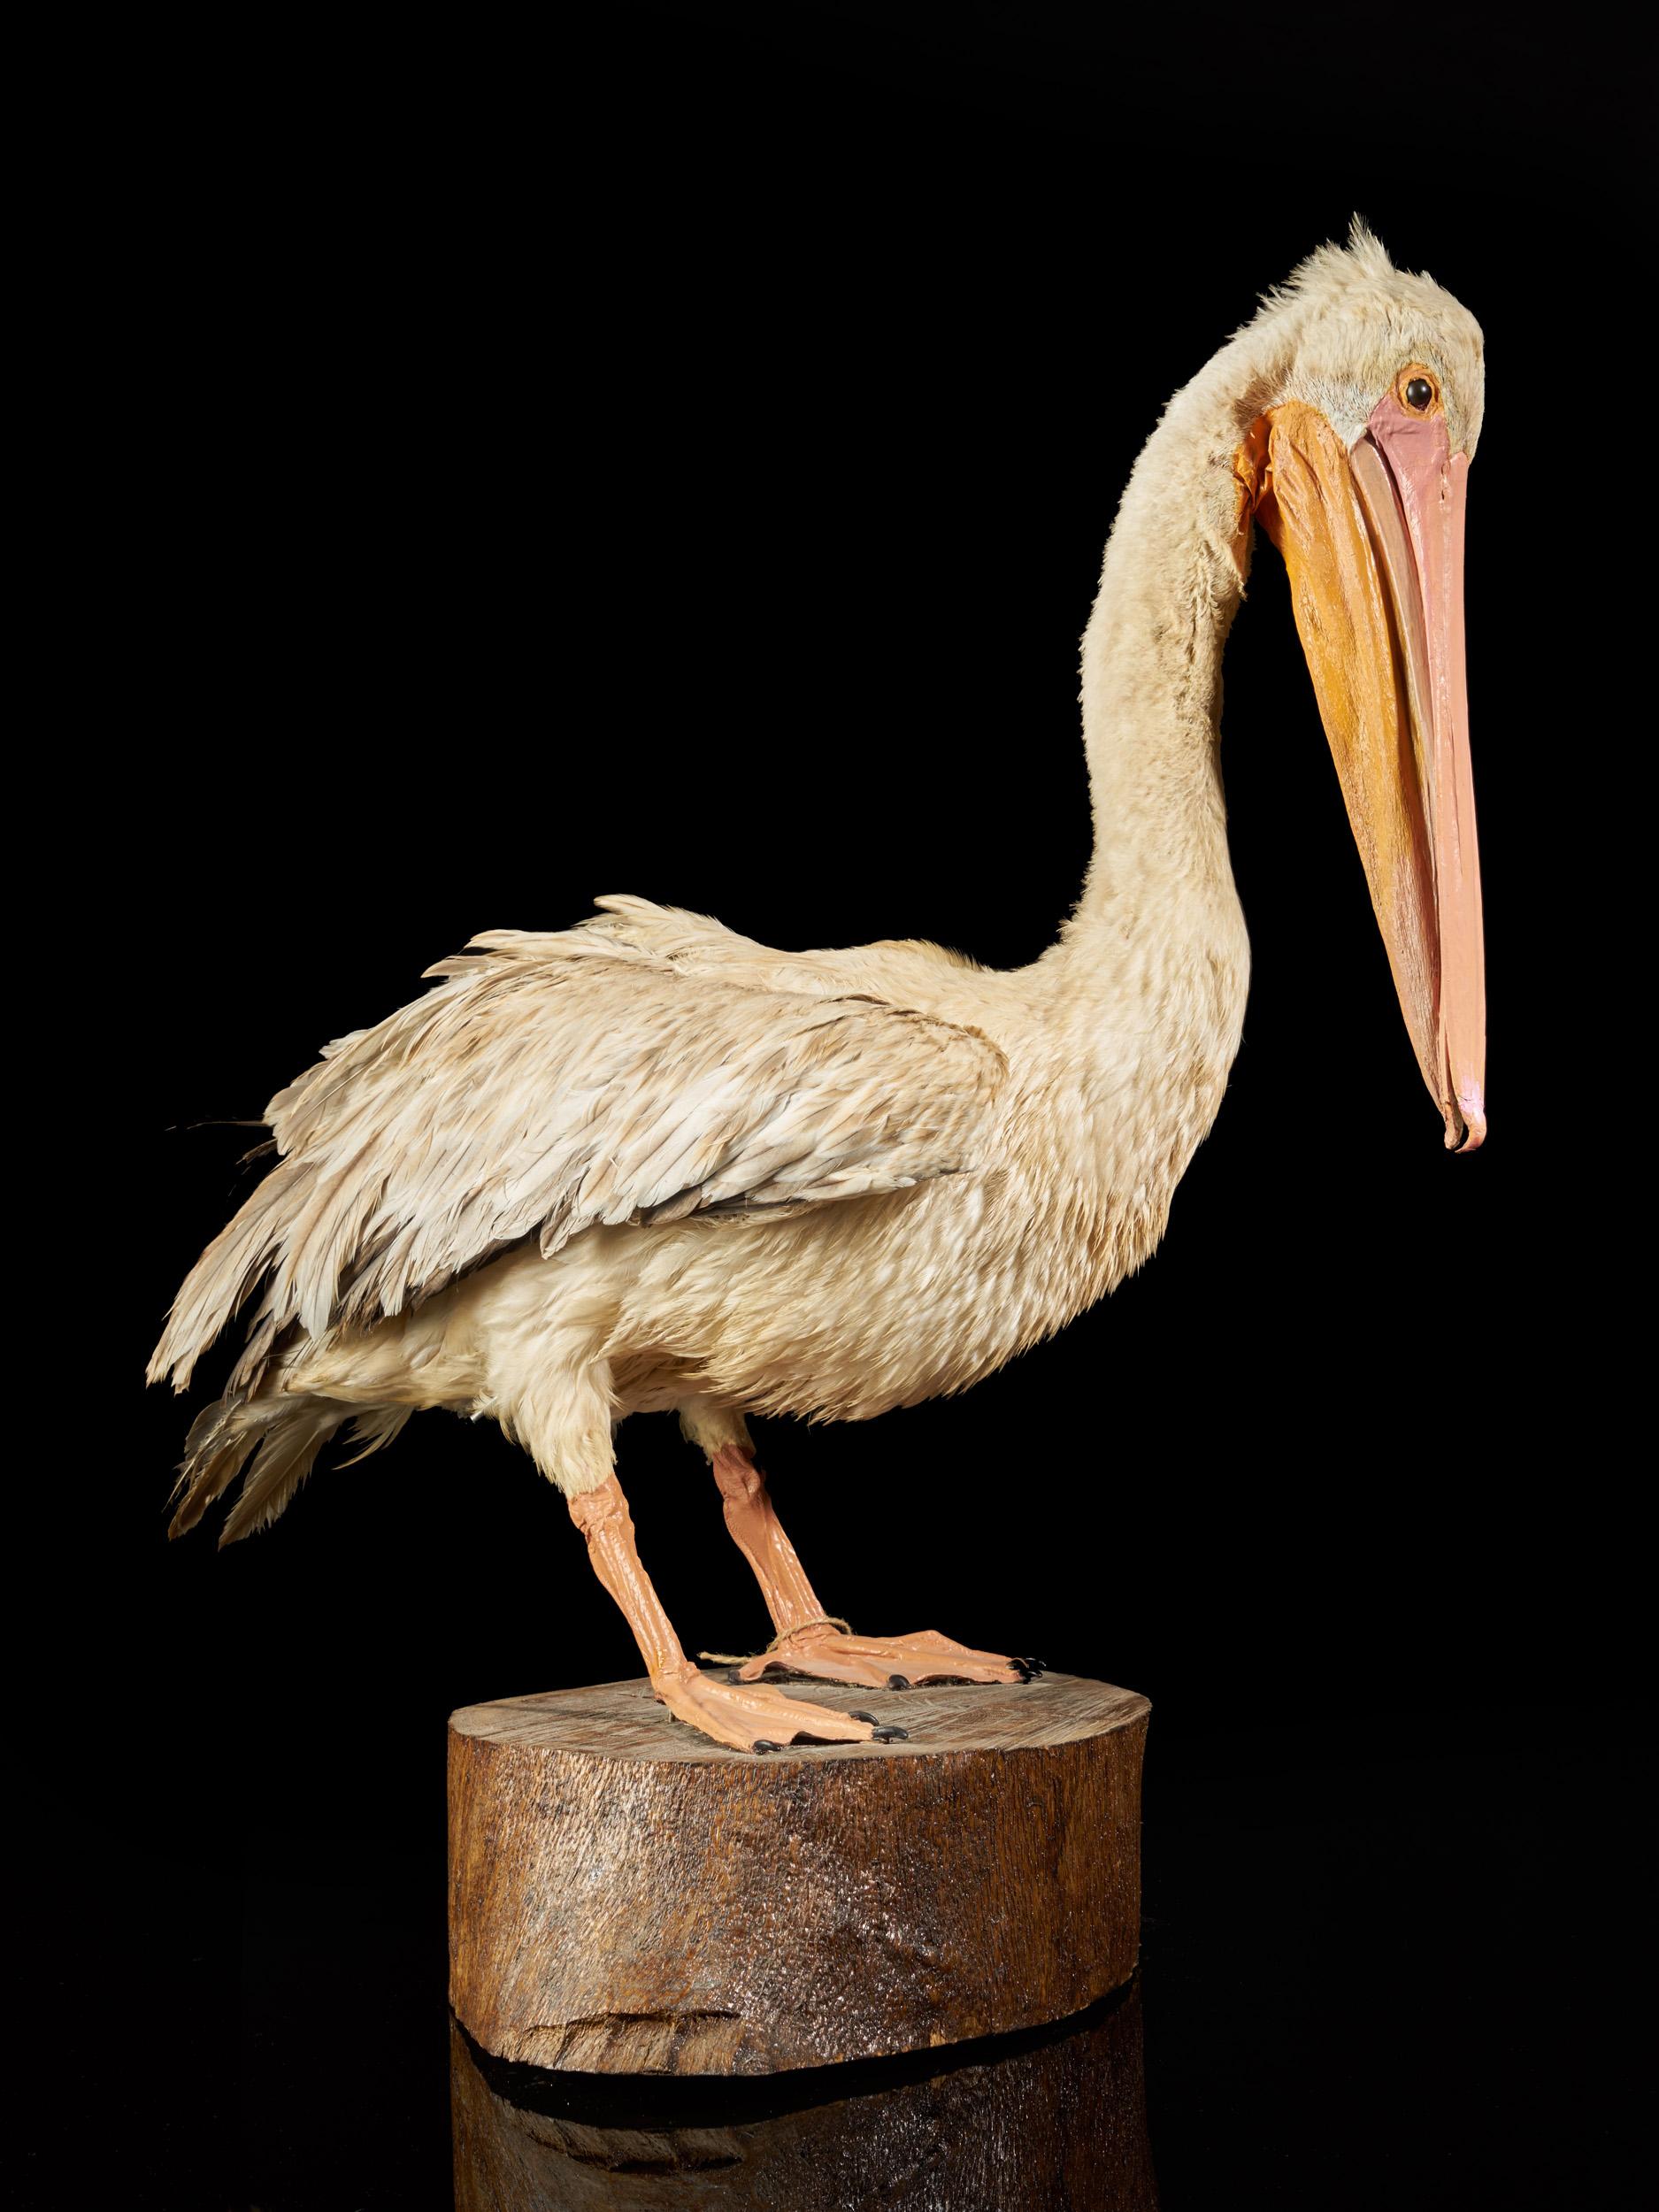 Pelicans are large water birds characterized by a long beak and a large throat pouch used for catching prey and draining water from the scooped-up contents before swallowing. They have predominantly pale plumage, and their bills, pouches, and bare